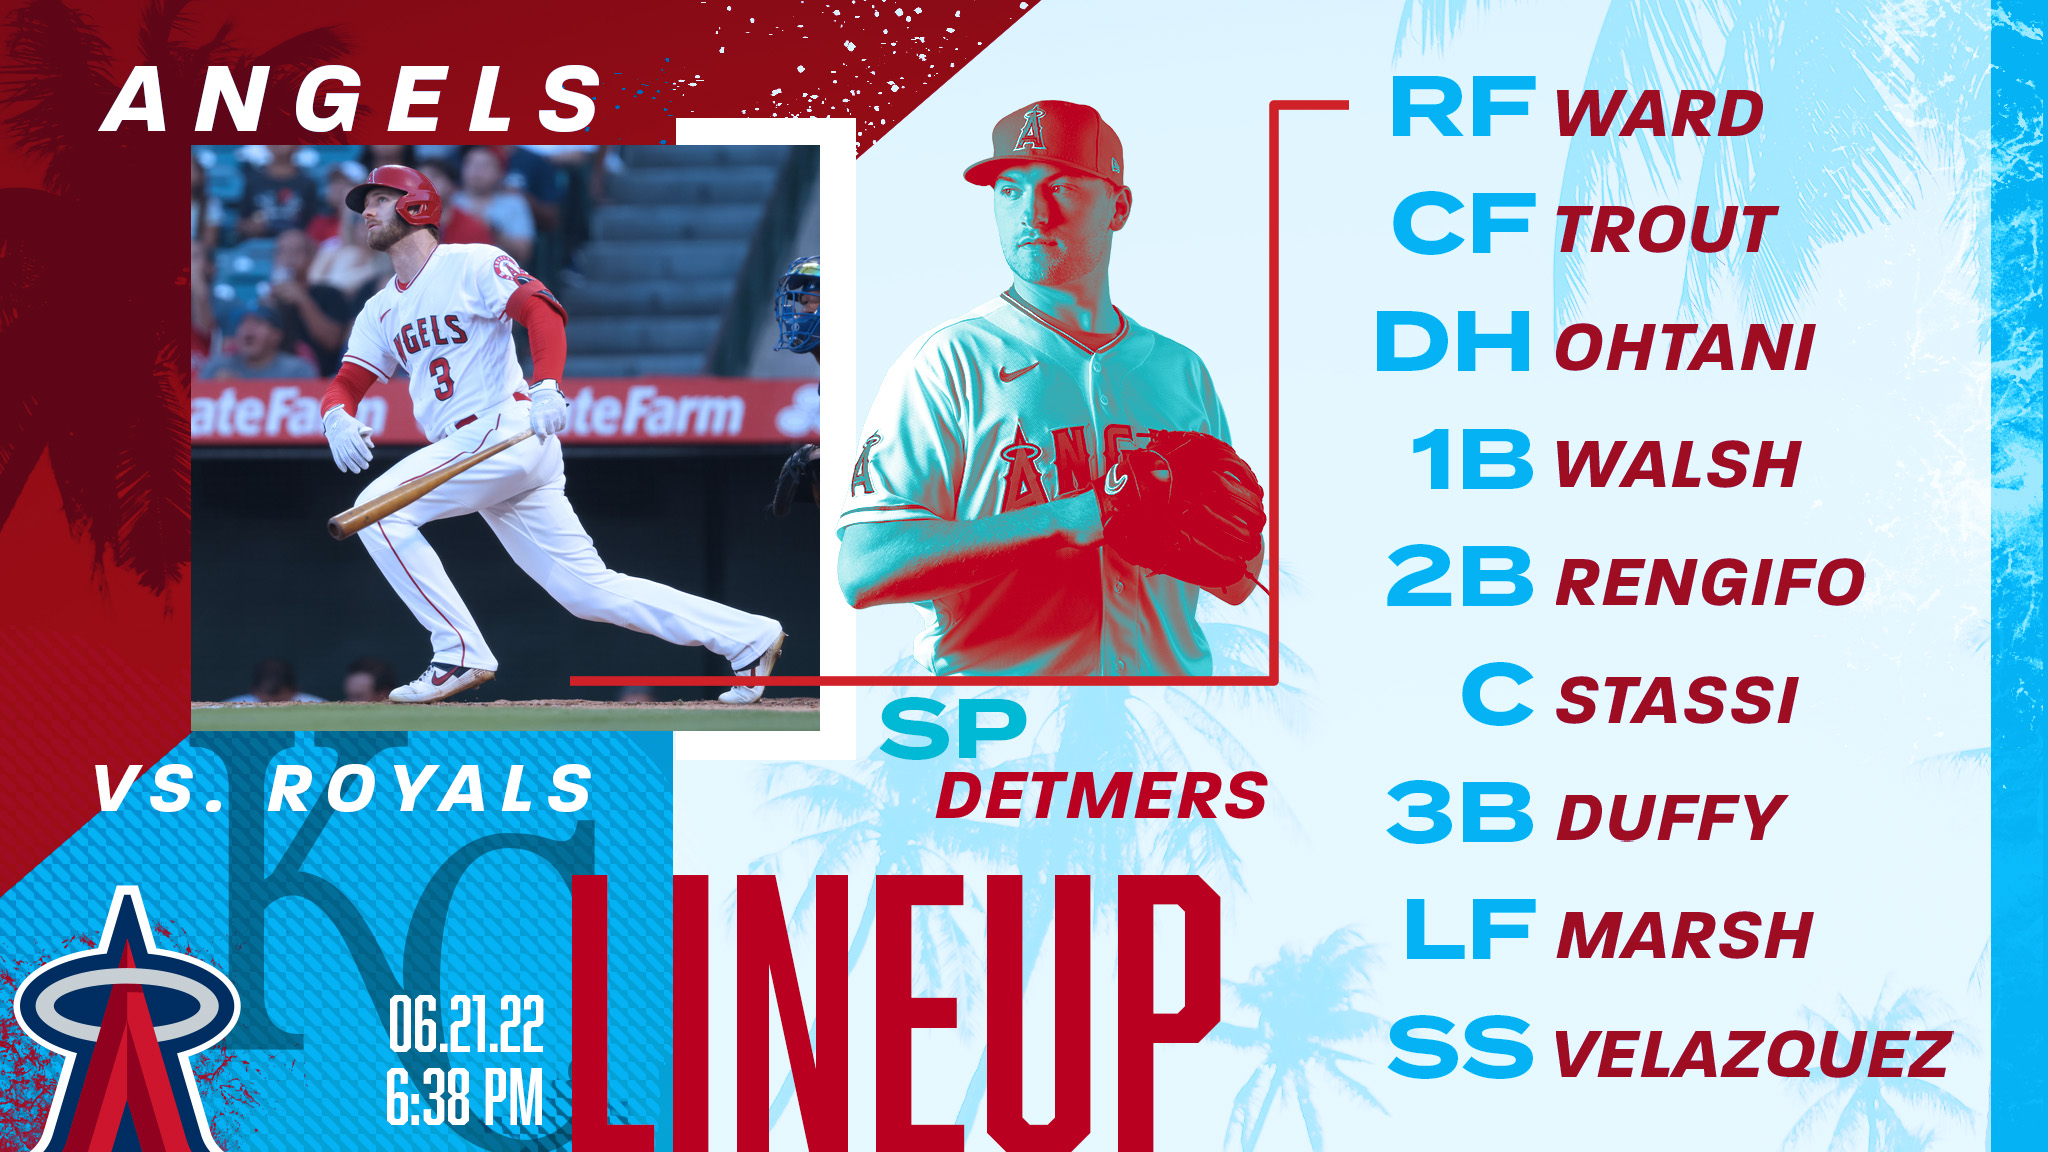 6/21 Lineup: Detmers on the mound